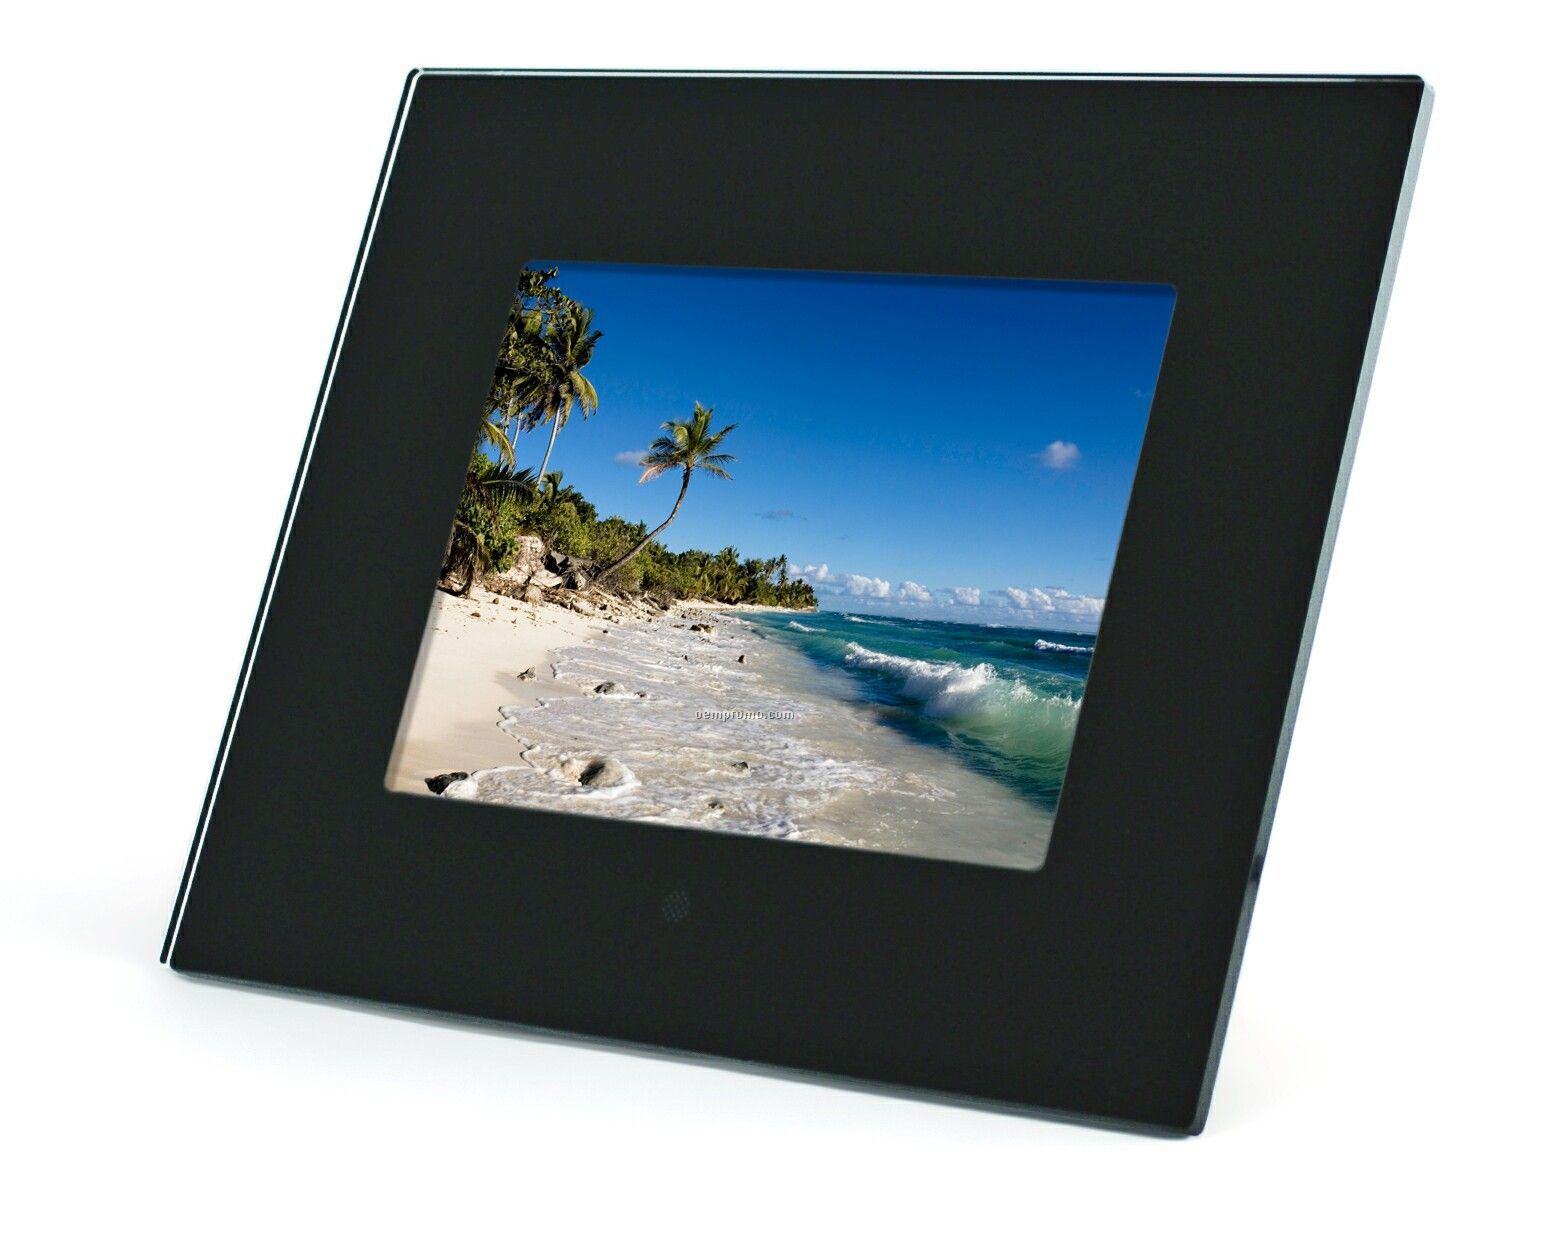 8" Digital Picture Frame W/ 128 Mb Memory